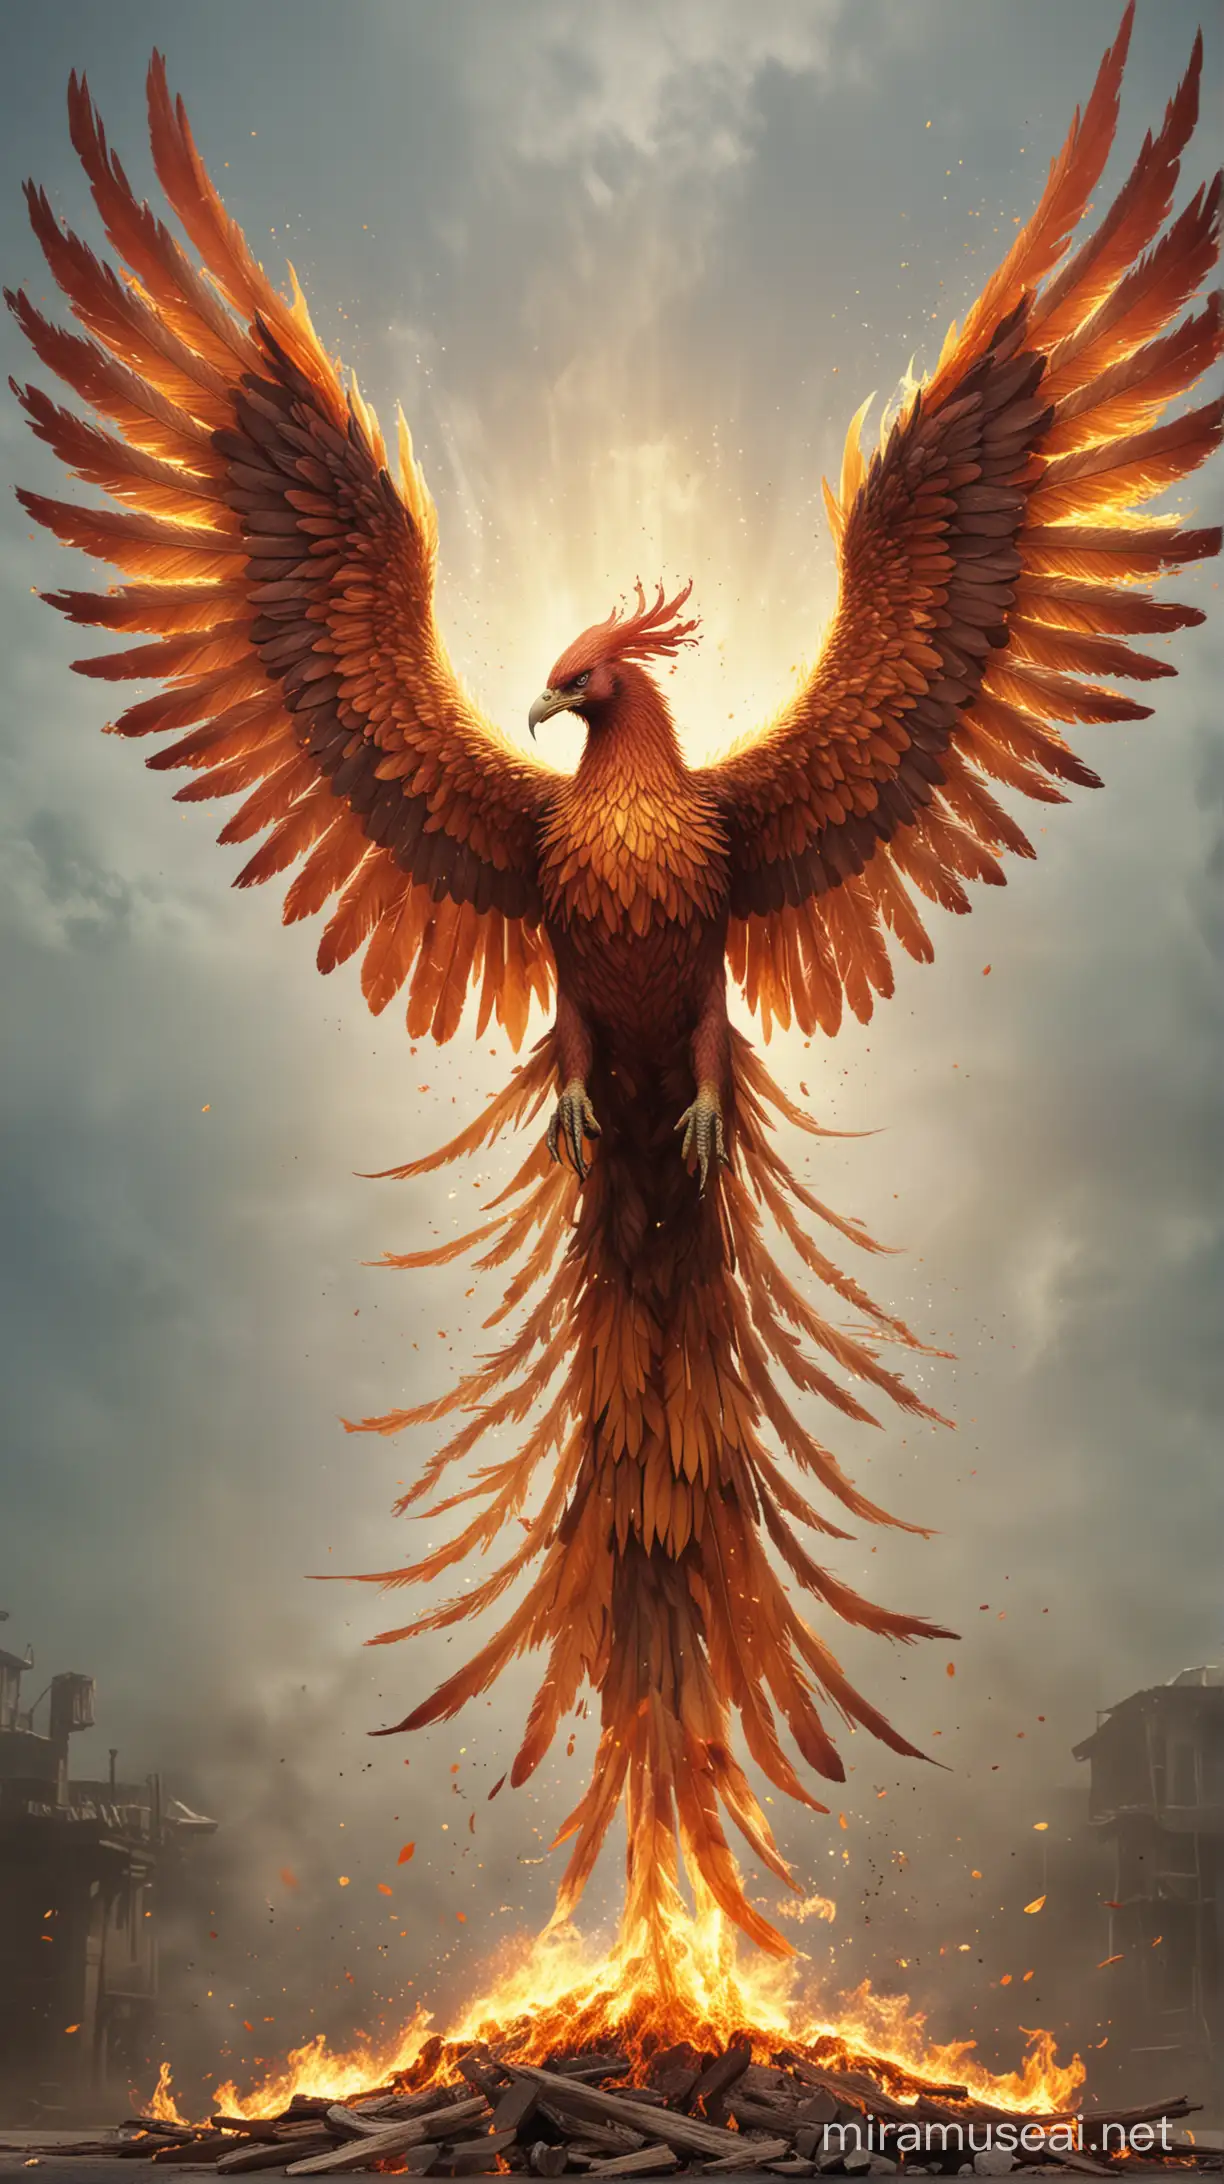 a phoenix with wings spread